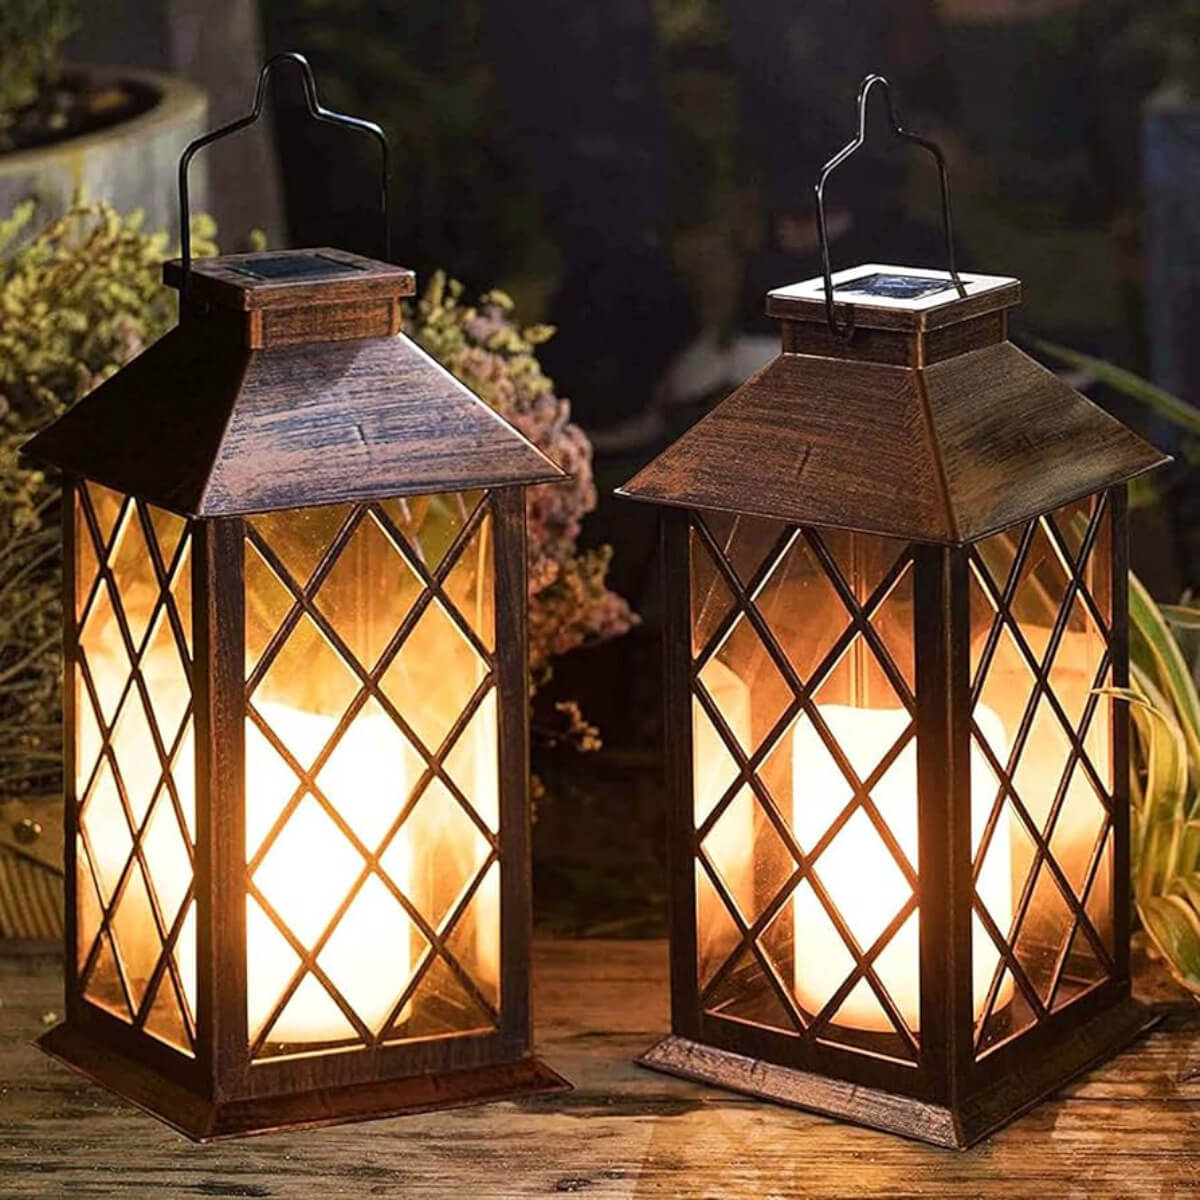 How To Make A Lantern Into A Lamp